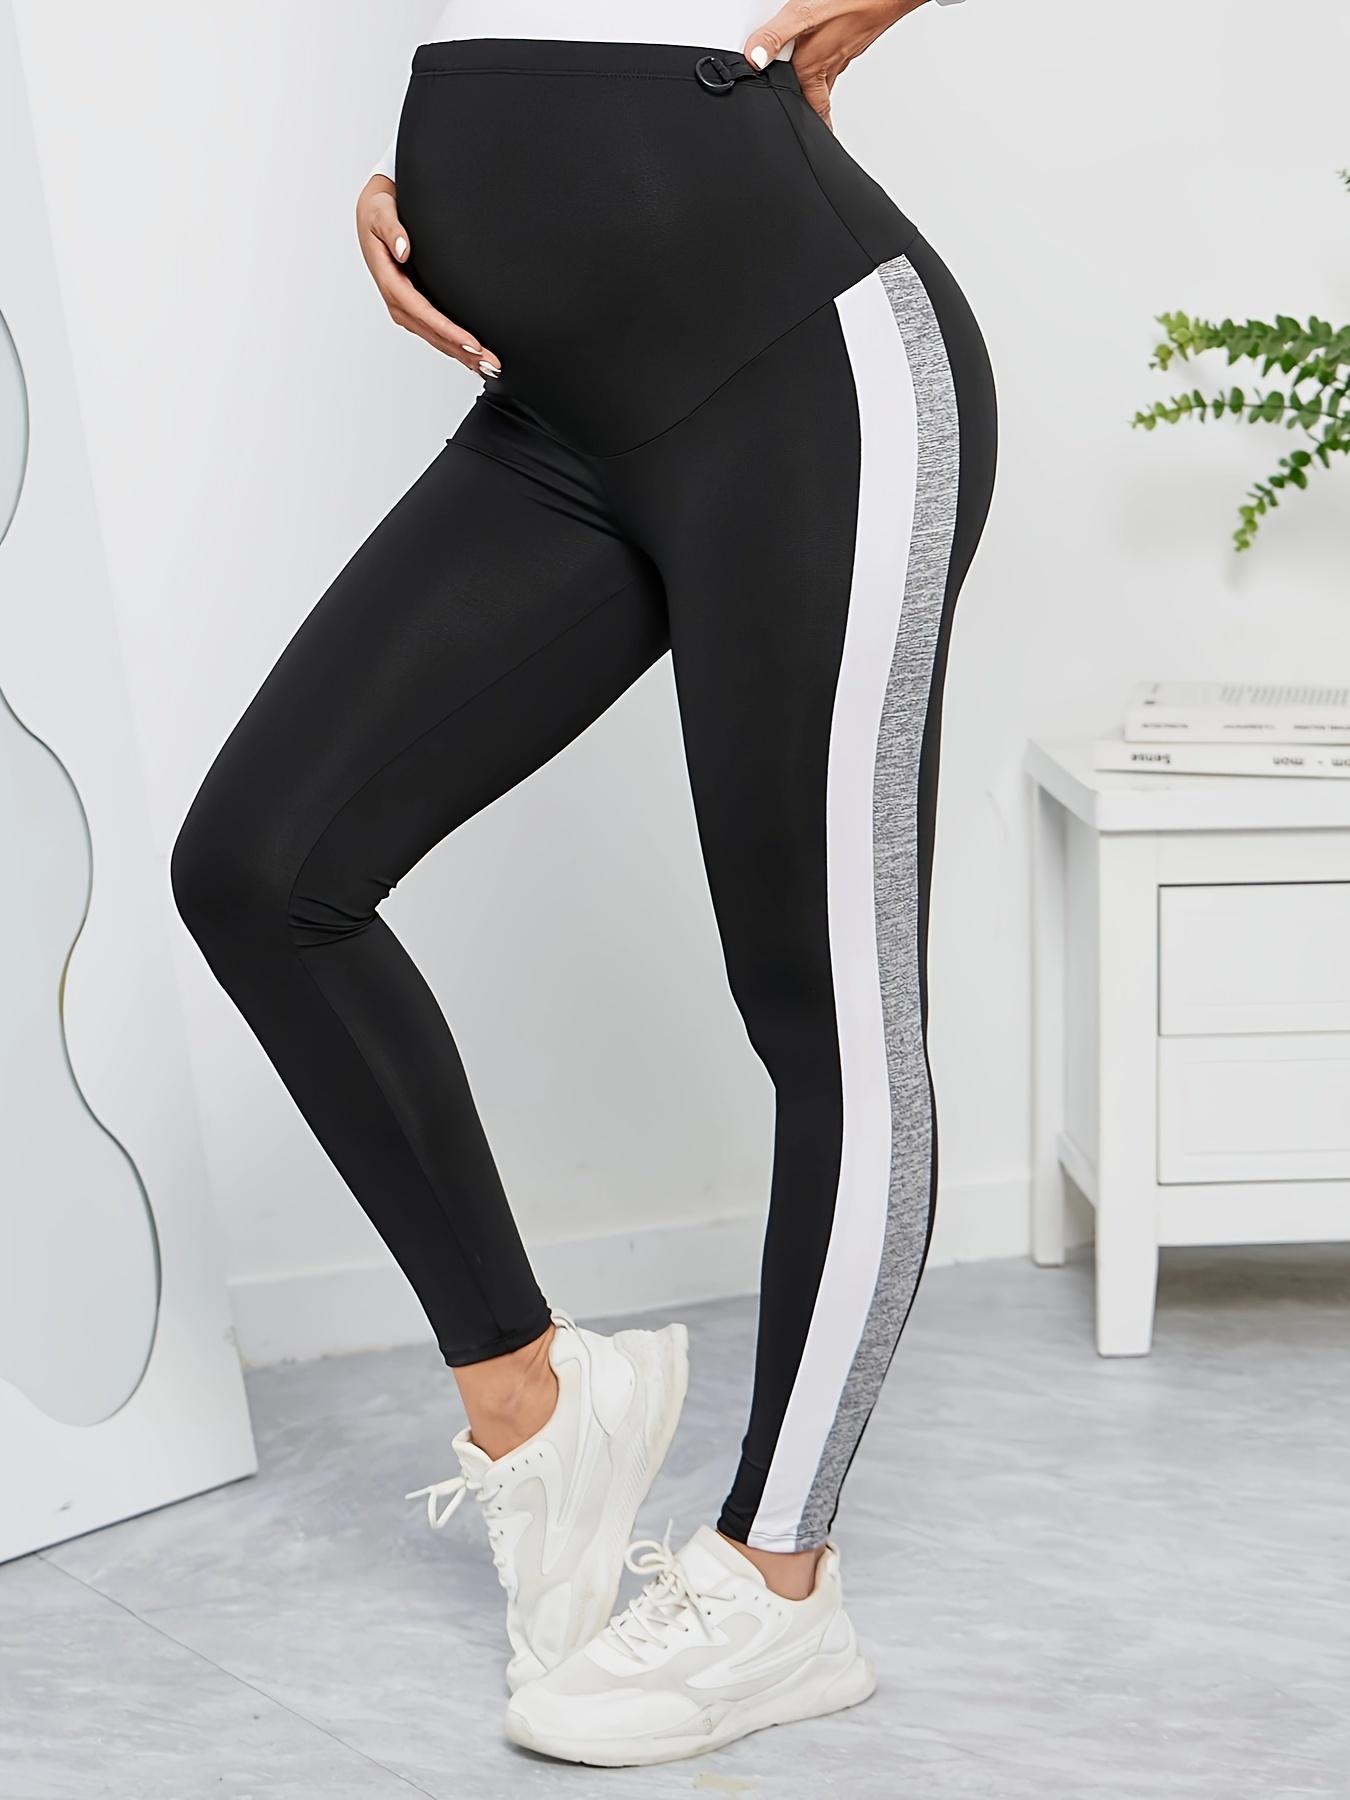 Enerful Womens Maternity capri Leggings Over the Belly Pregnancy Active  Wear Athletic Yoga Pants with Pockets